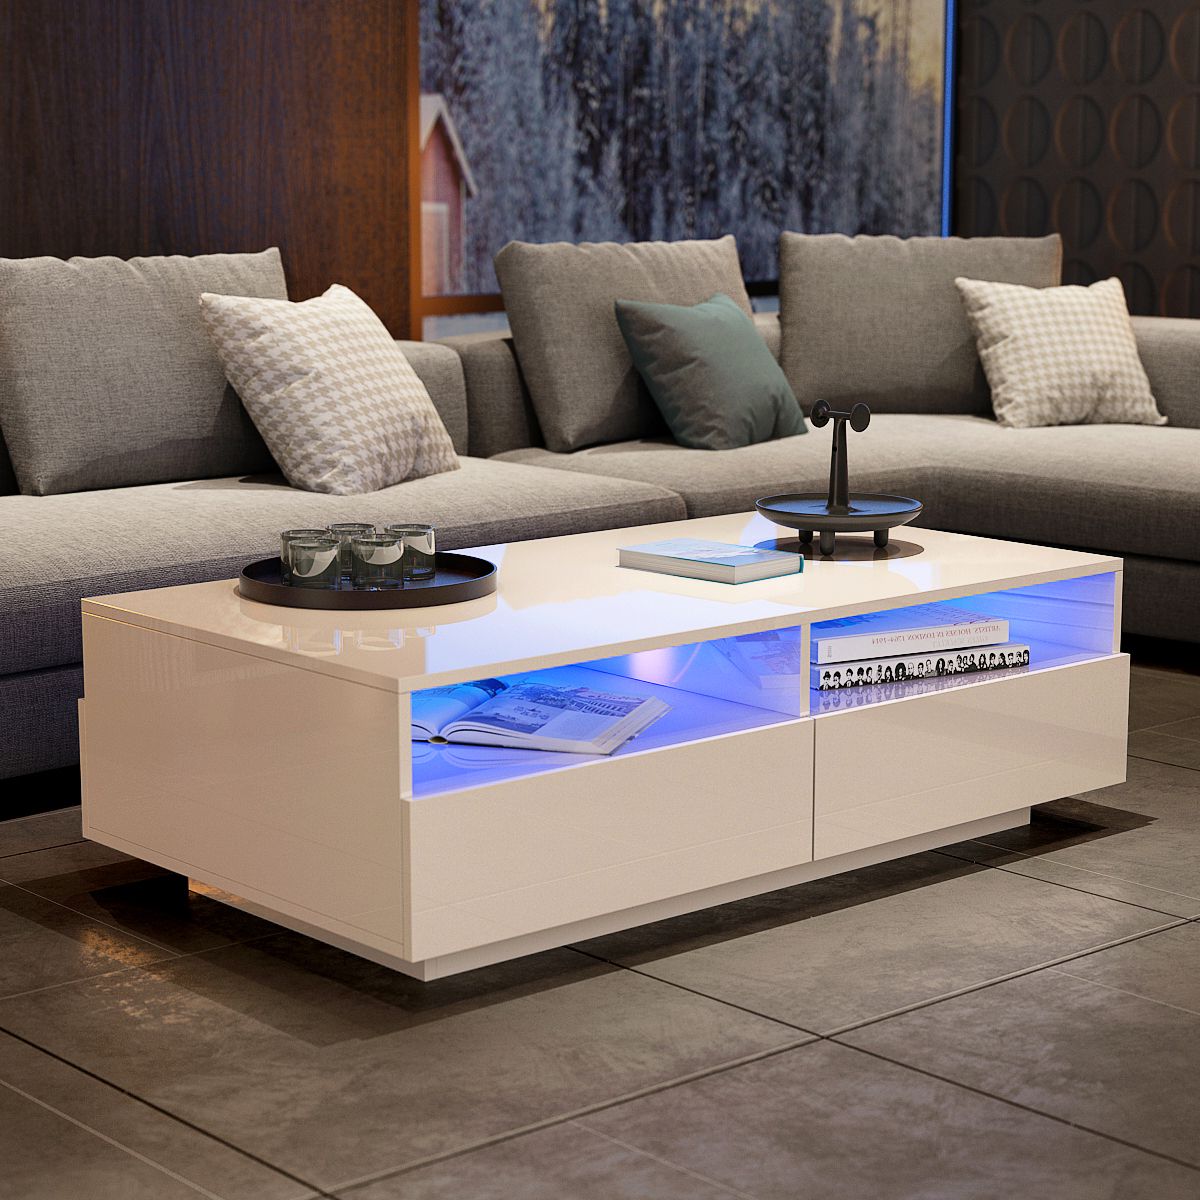 2020 White High Gloss Coffee Table With Led Lights : High Gloss White Coffee In Coffee Tables With Led Lights (View 10 of 15)